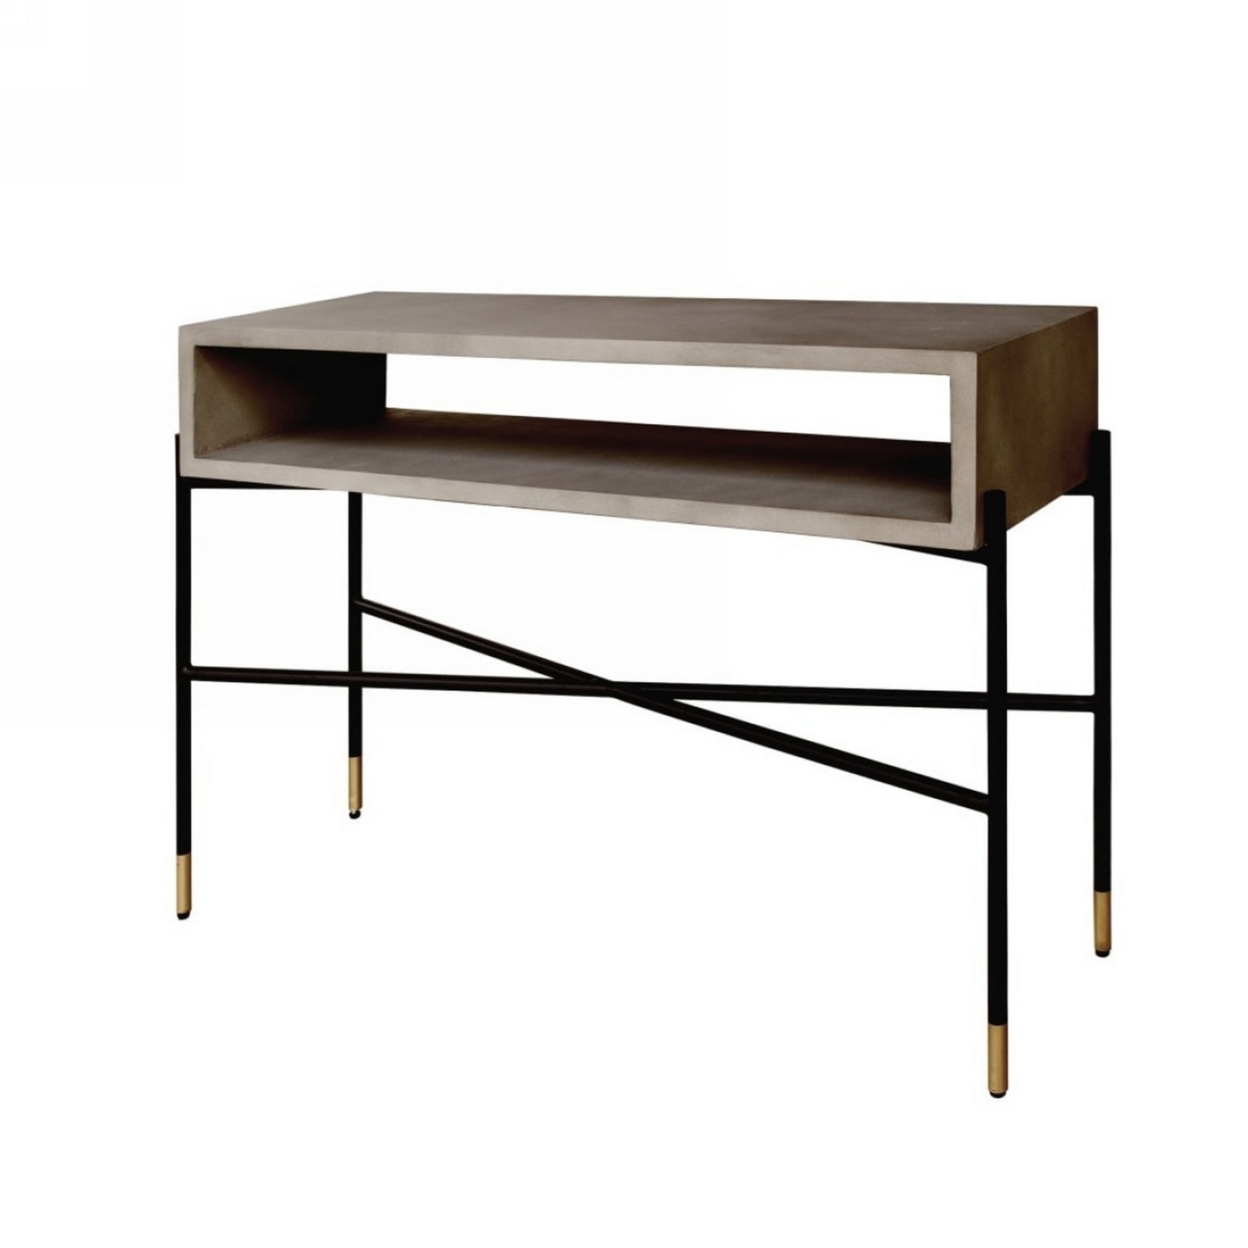 Rectangular Console Table With Concrete Top And Metal Base, Gray And Black- Saltoro Sherpi